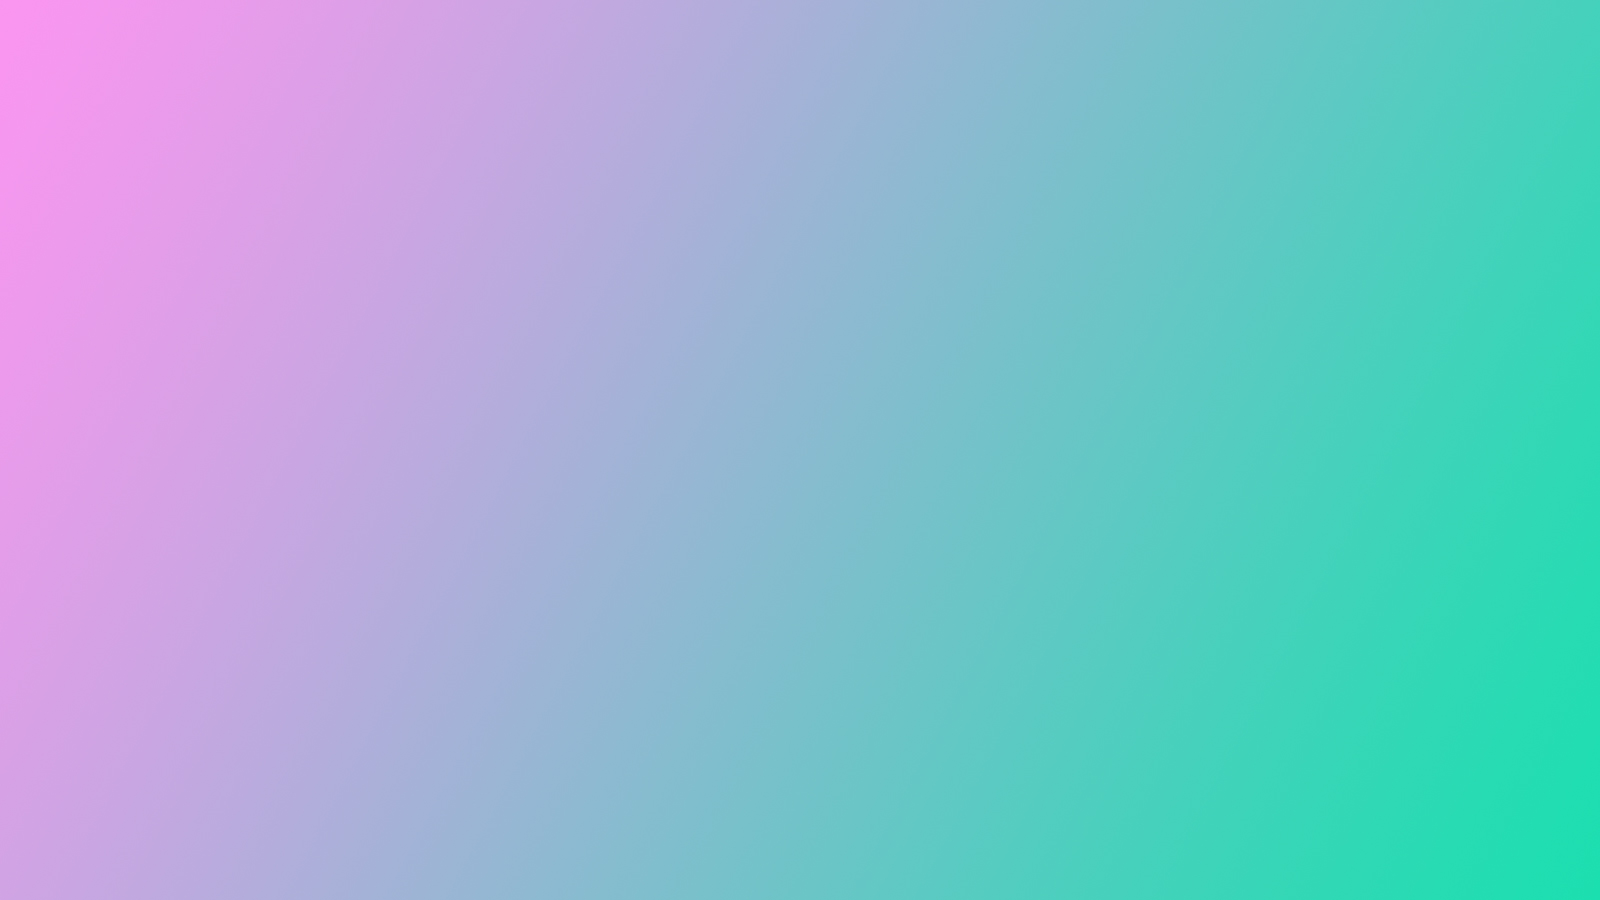 Pastel Blue Backgrounds Images Pictures   Becuo